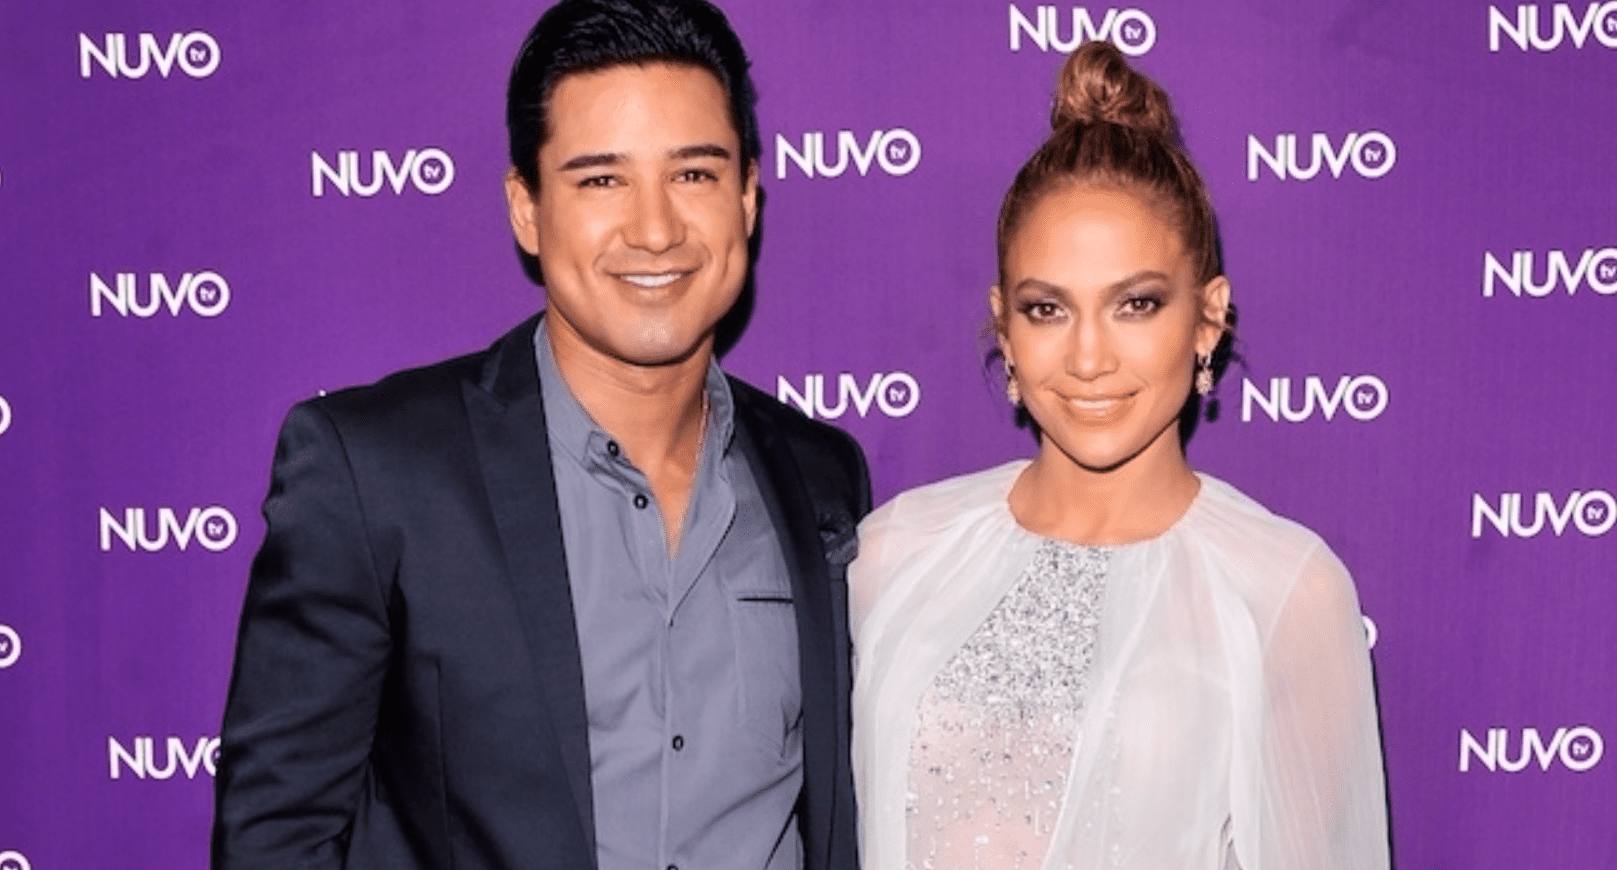 Is Mario Lopez Related To Jennifer Lopez